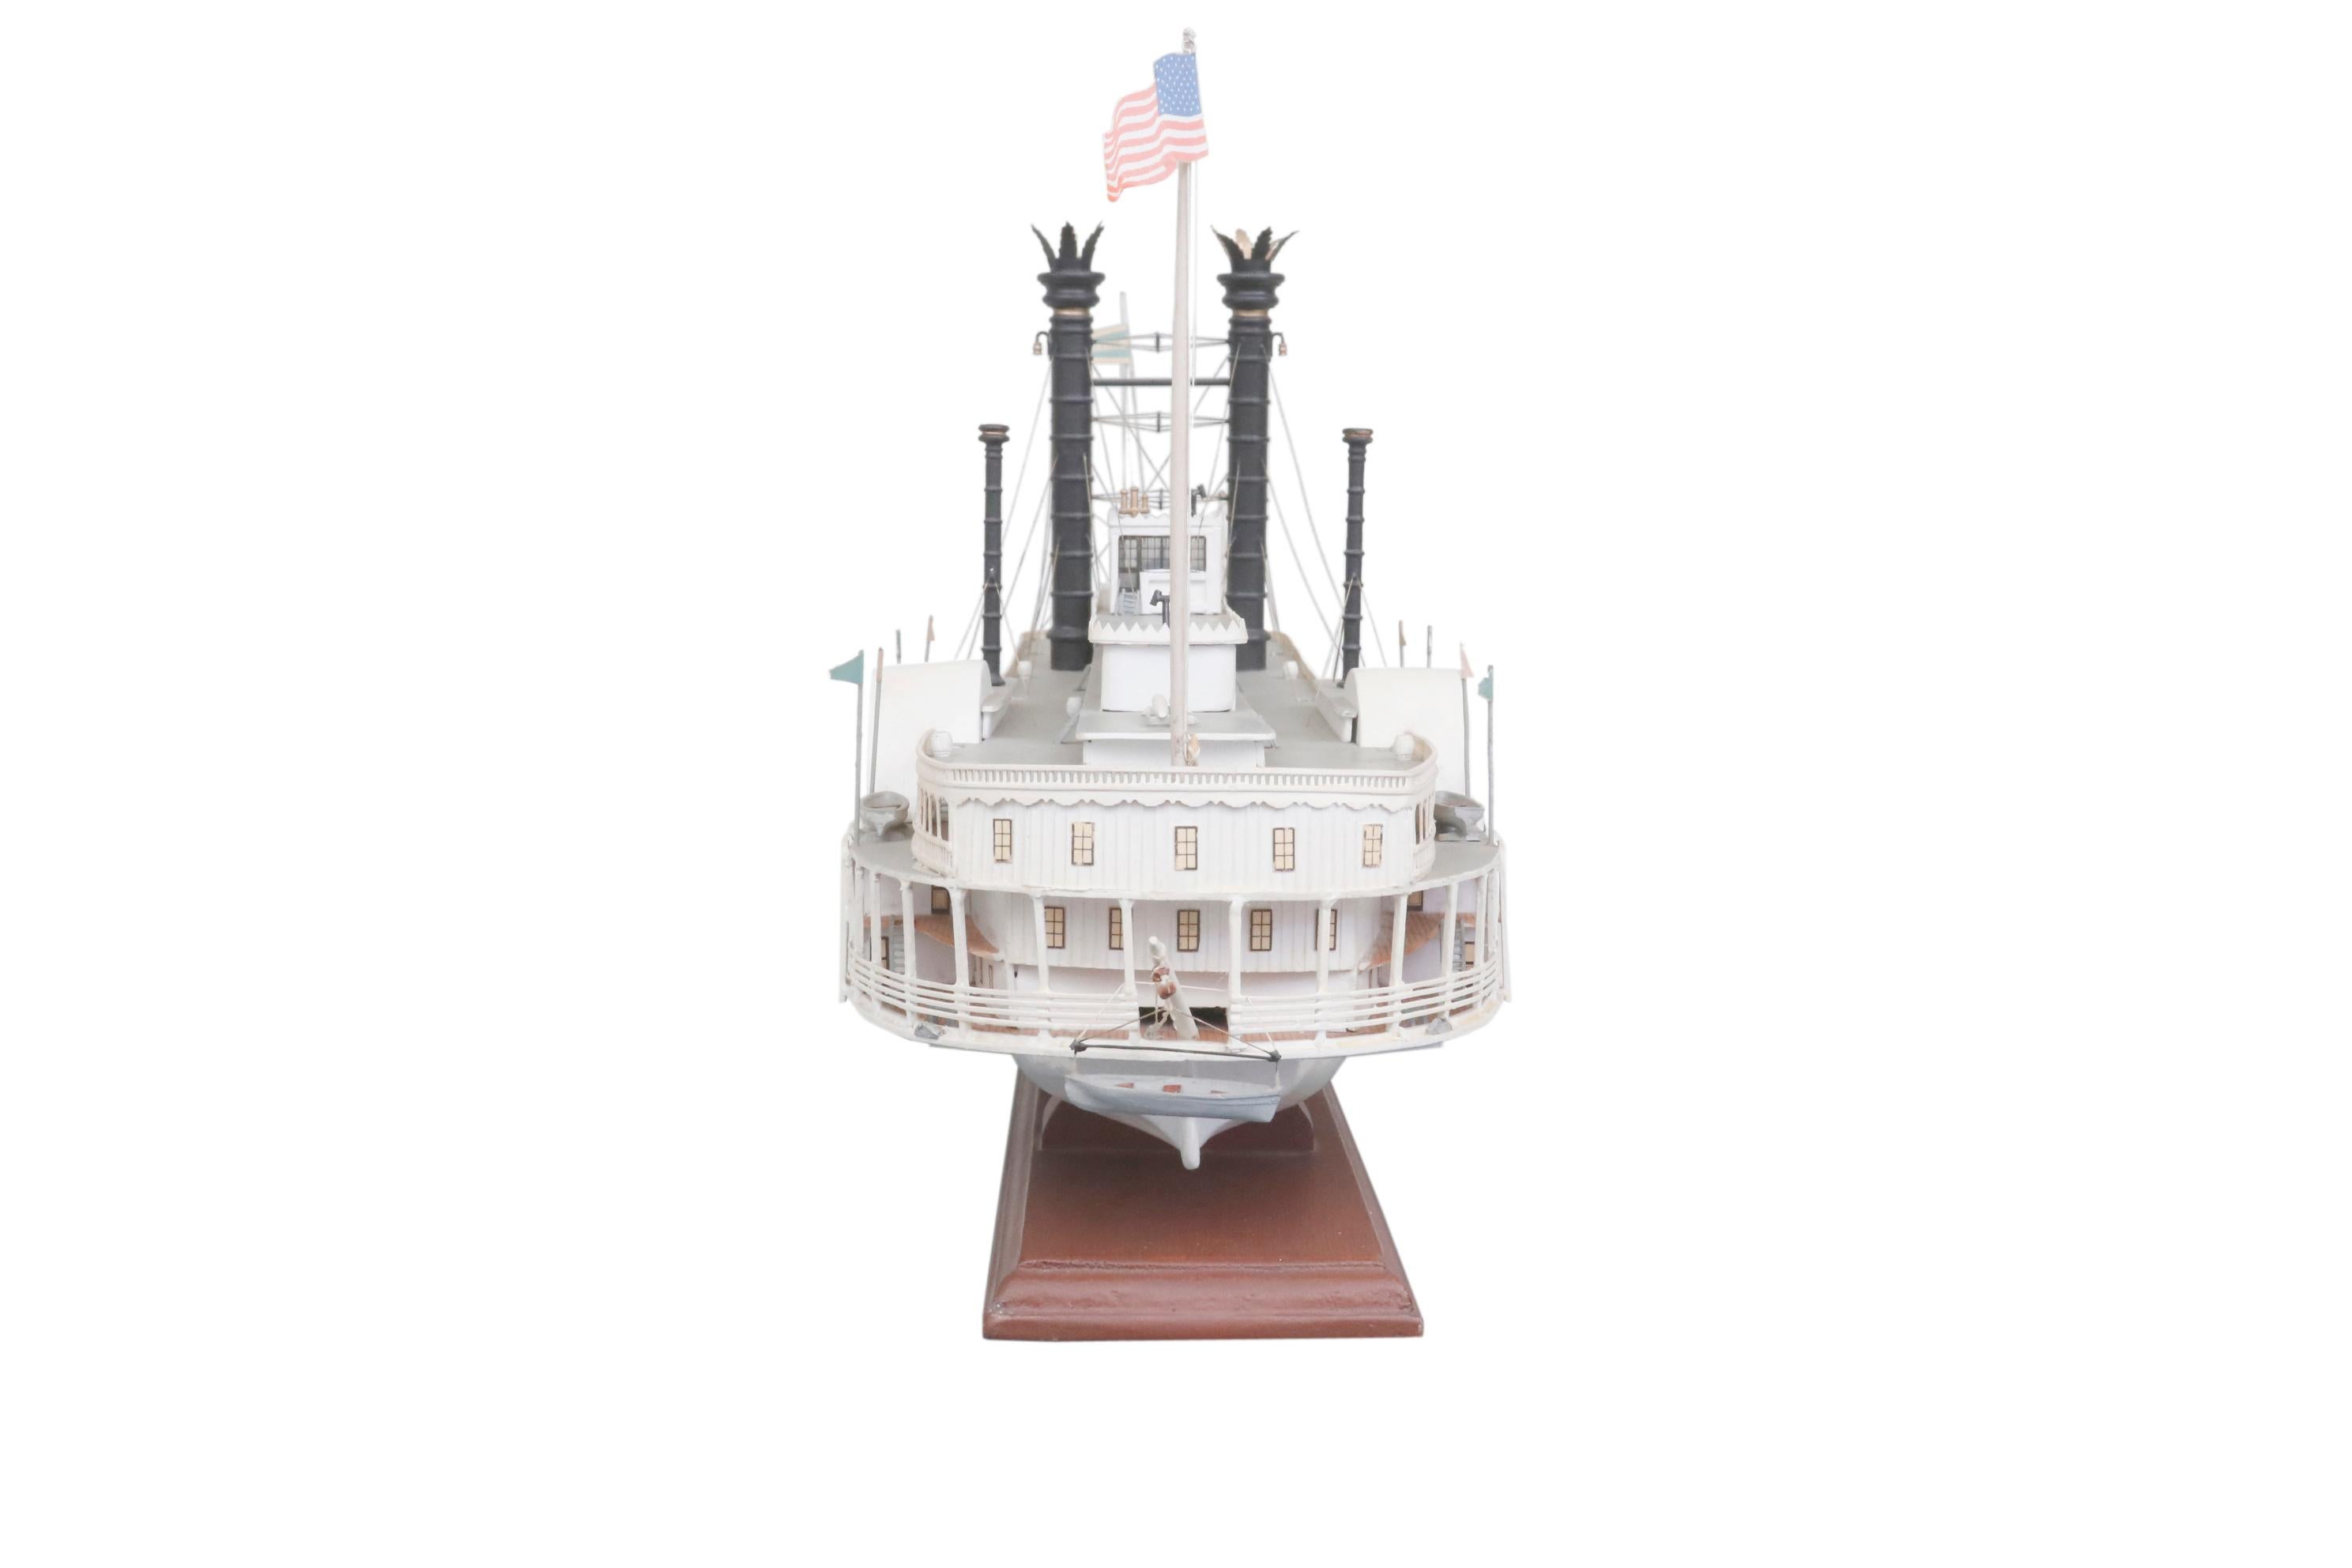 Wood Detailed Replica of the ROBERT E. LEE: Paddle Wheeler